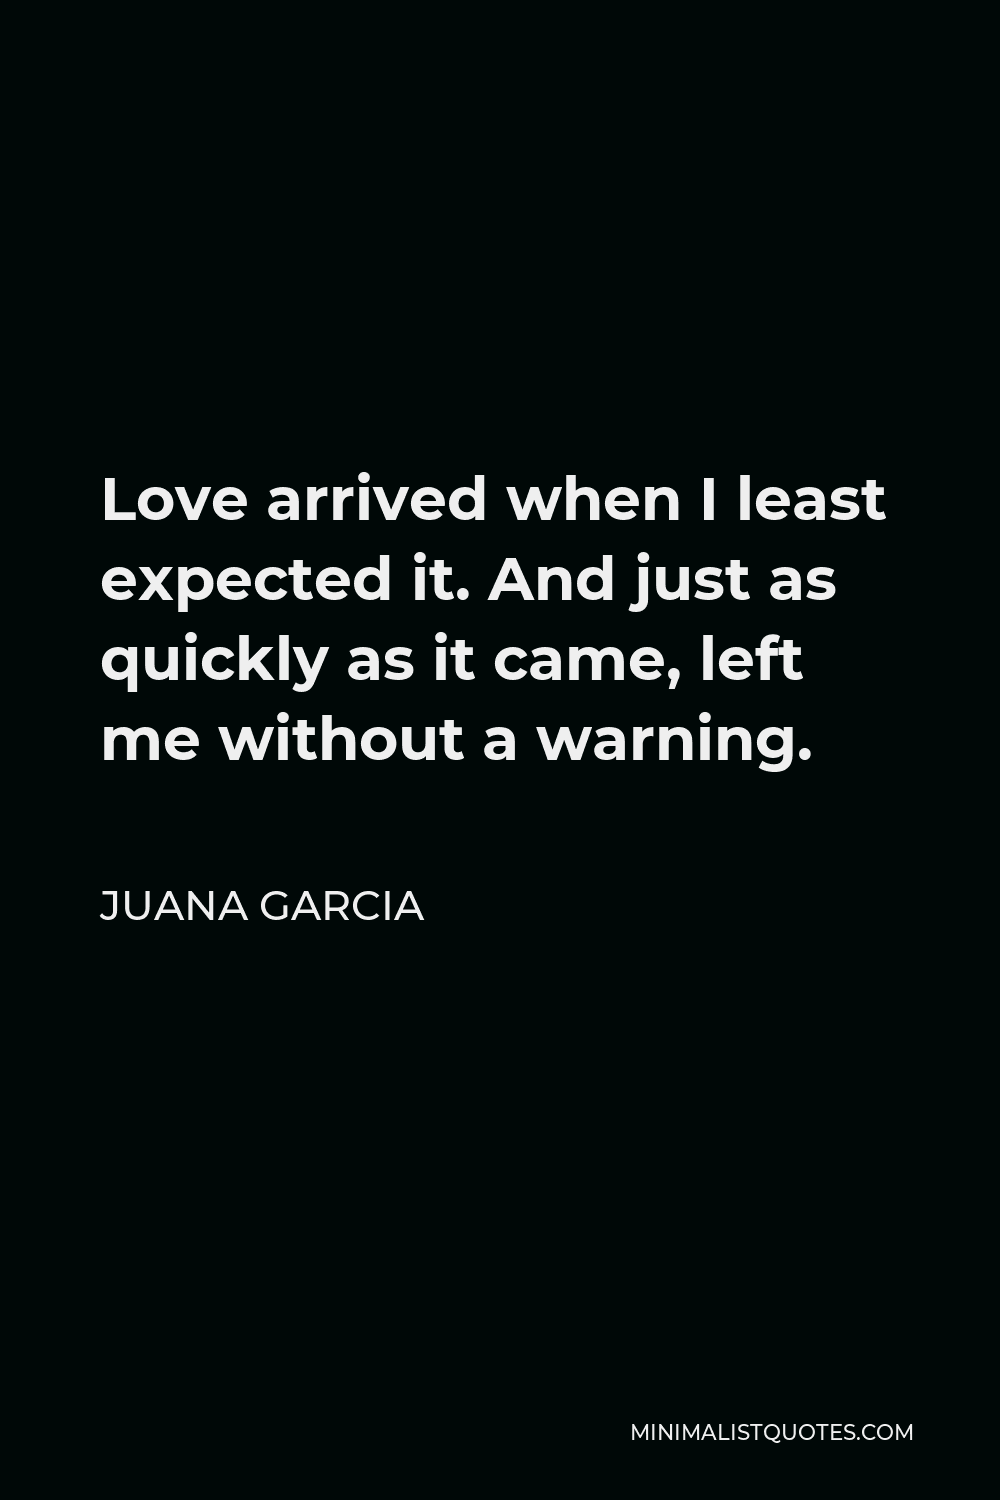 Juana Garcia Quote - Love arrived when I least expected it. And just as quickly as it came, left me without a warning.